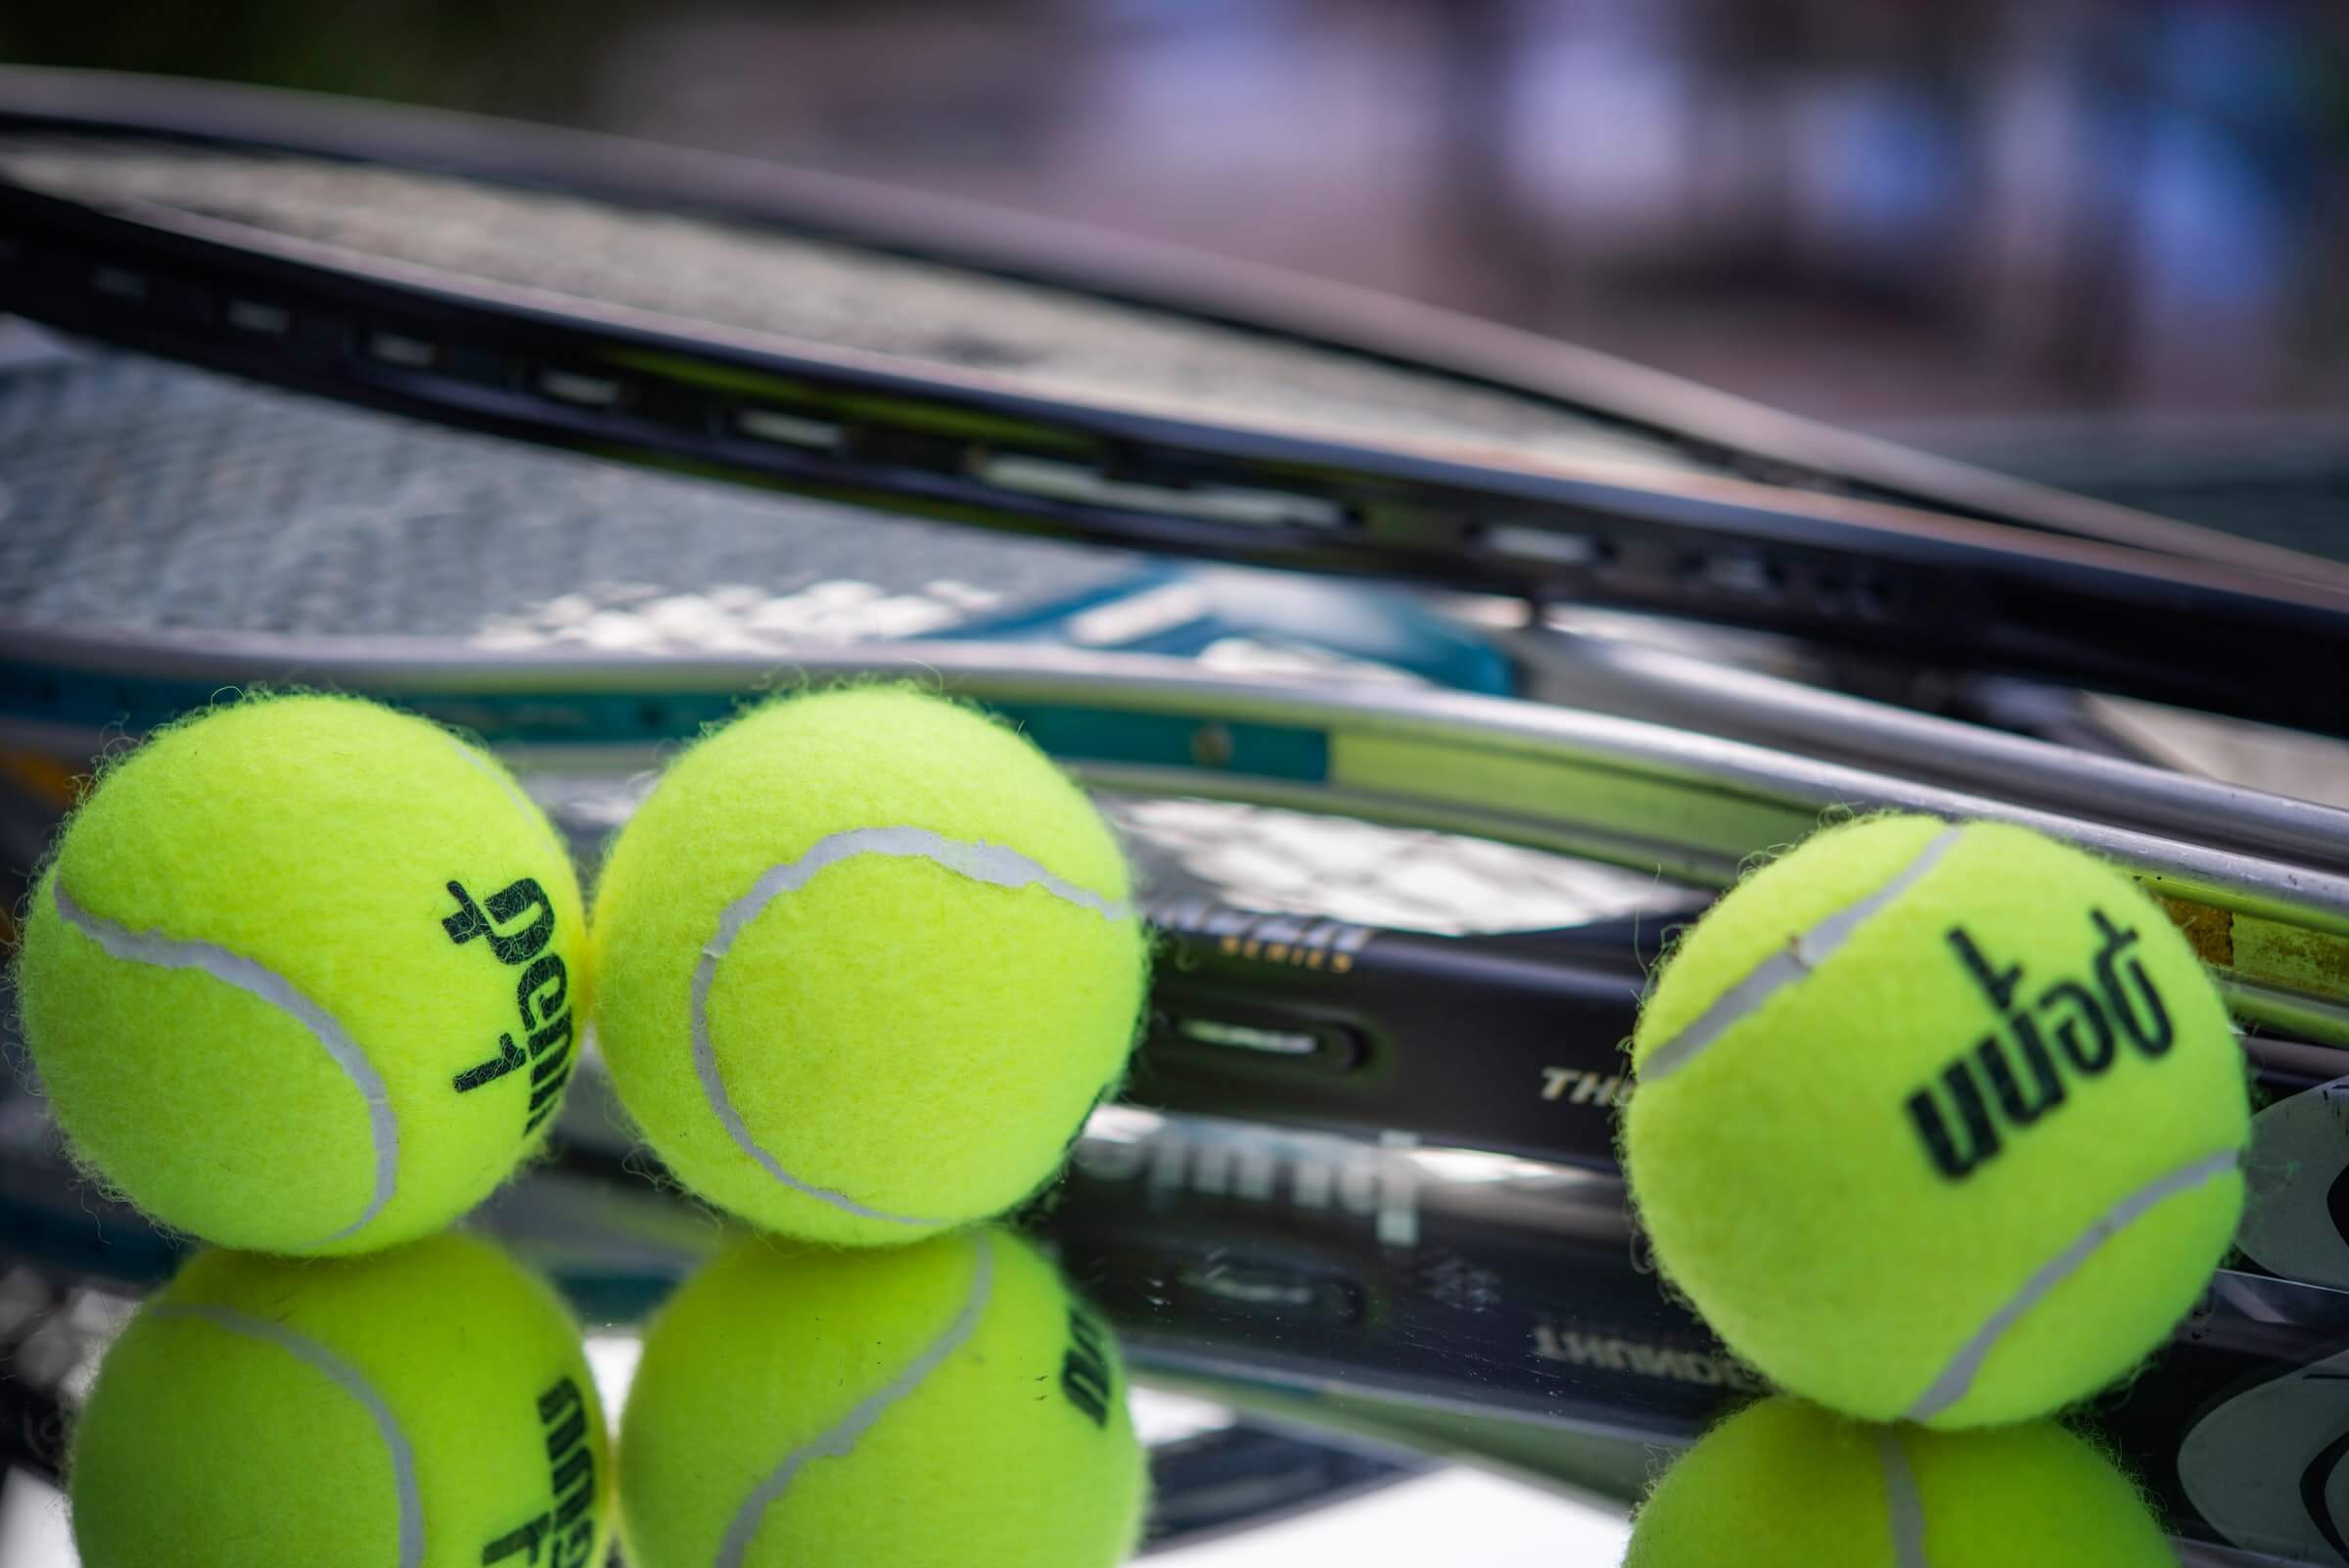 Close up of tennis balls and tennis racquets with wet court backdrop